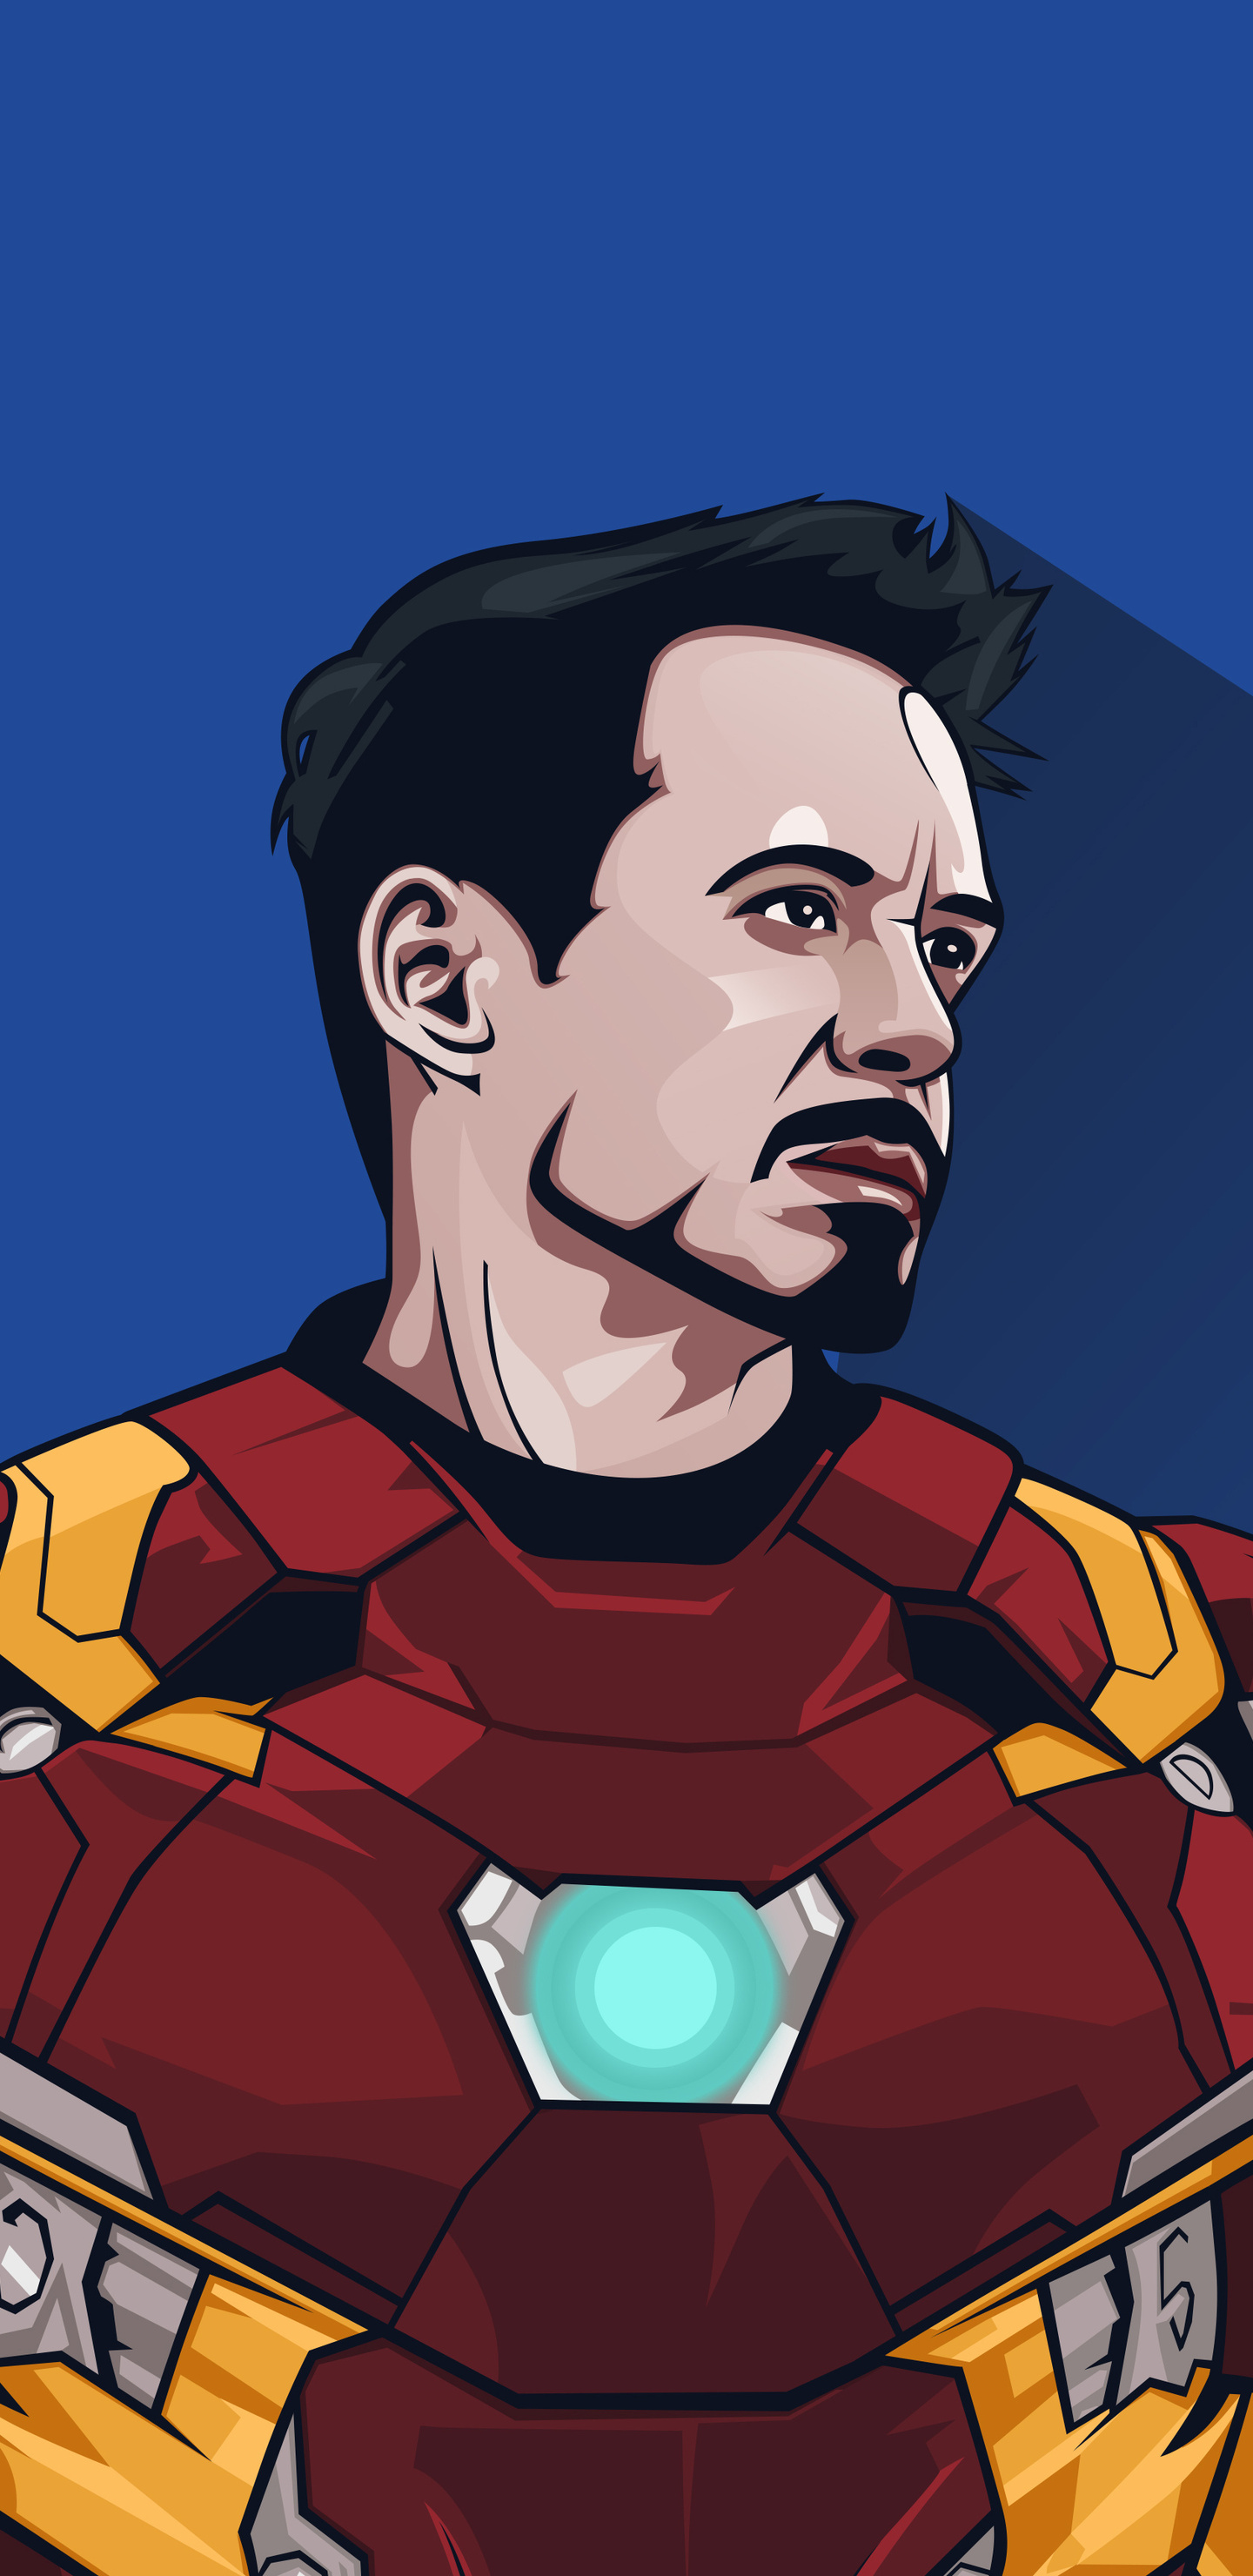 1440x2960 Iron Man And Captain America Artwork 5k Samsung Galaxy Note 9,8,  S9,S8,S8+ QHD HD 4k Wallpapers, Images, Backgrounds, Photos and Pictures